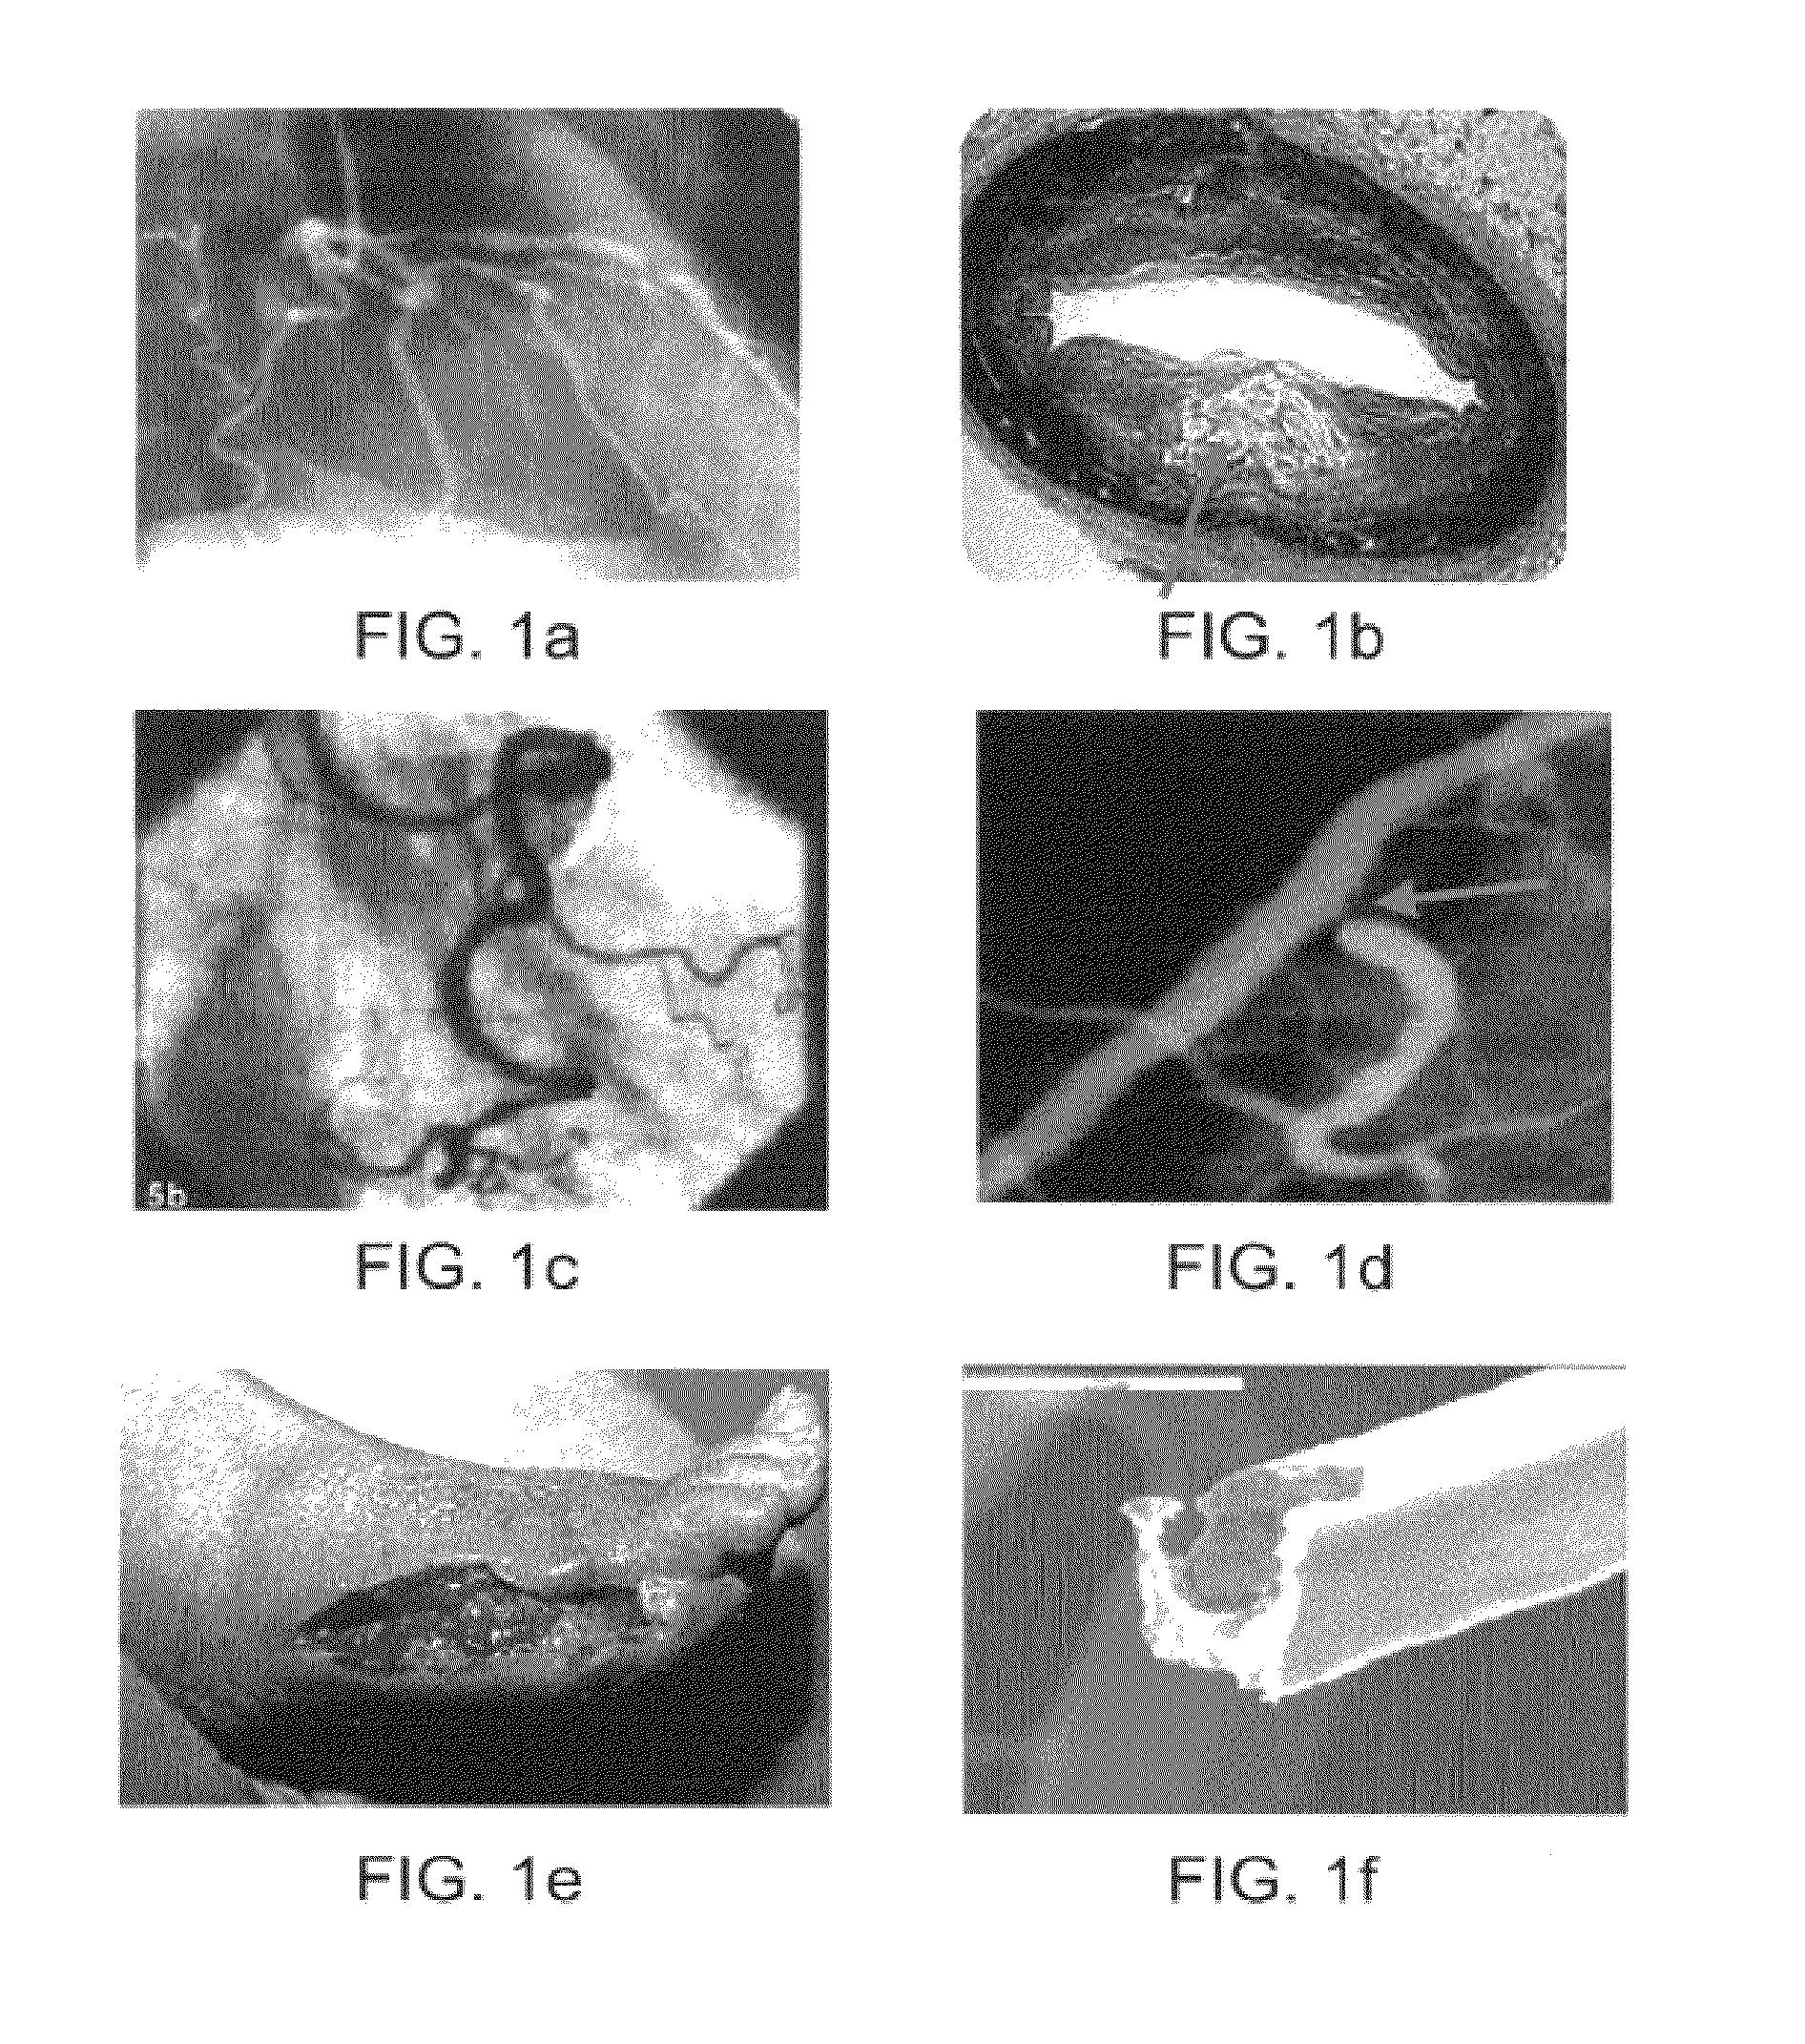 Apparatus and Method for Treatment of In-Stent Restenosis